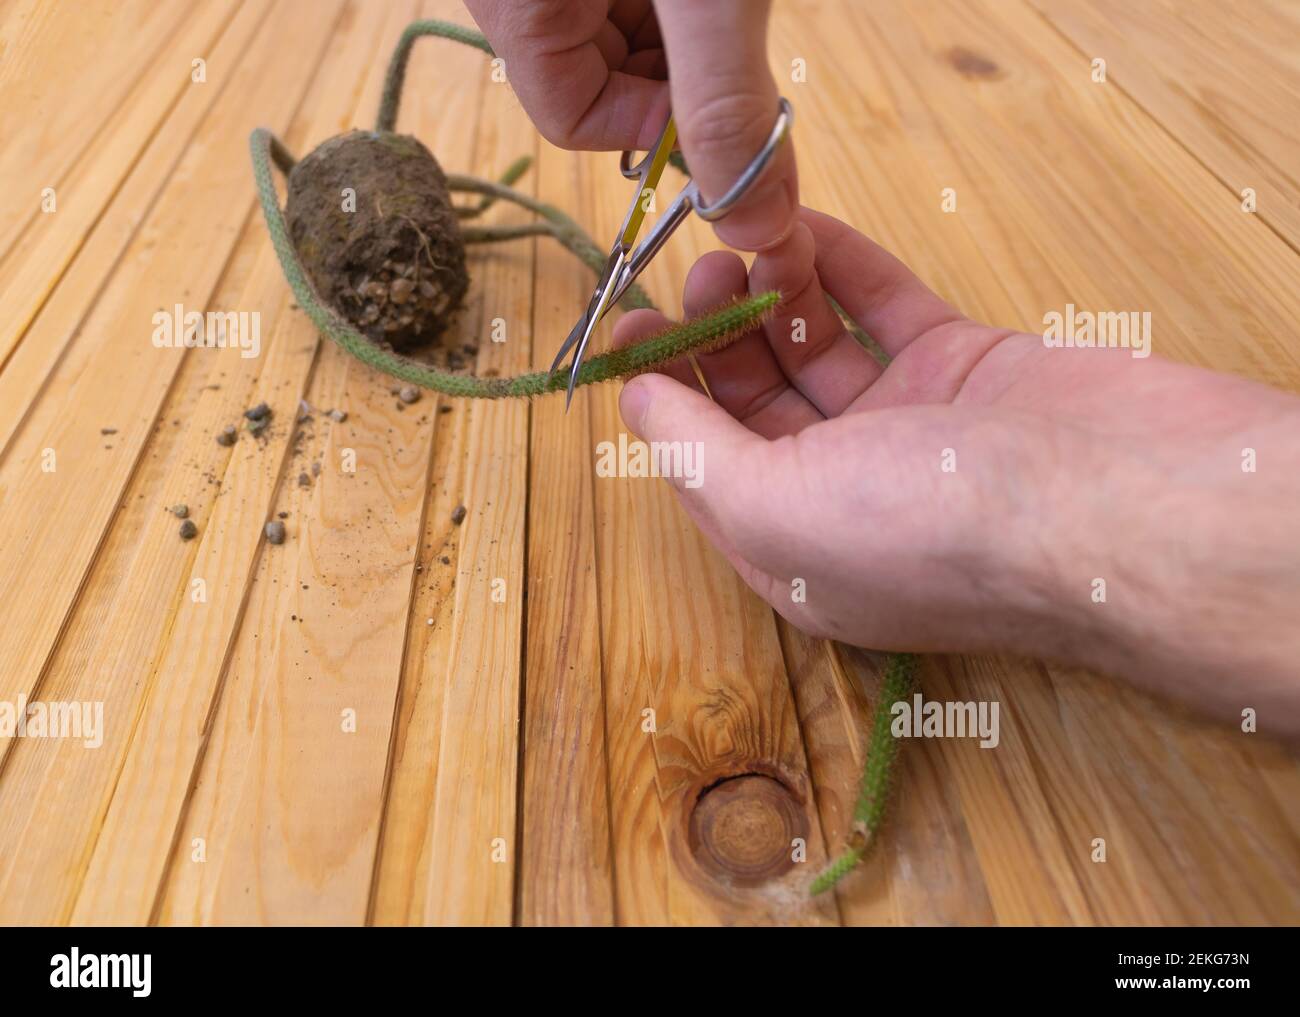 Concept of pruning Rattail Cactus - cutting the tail with scissors Stock Photo